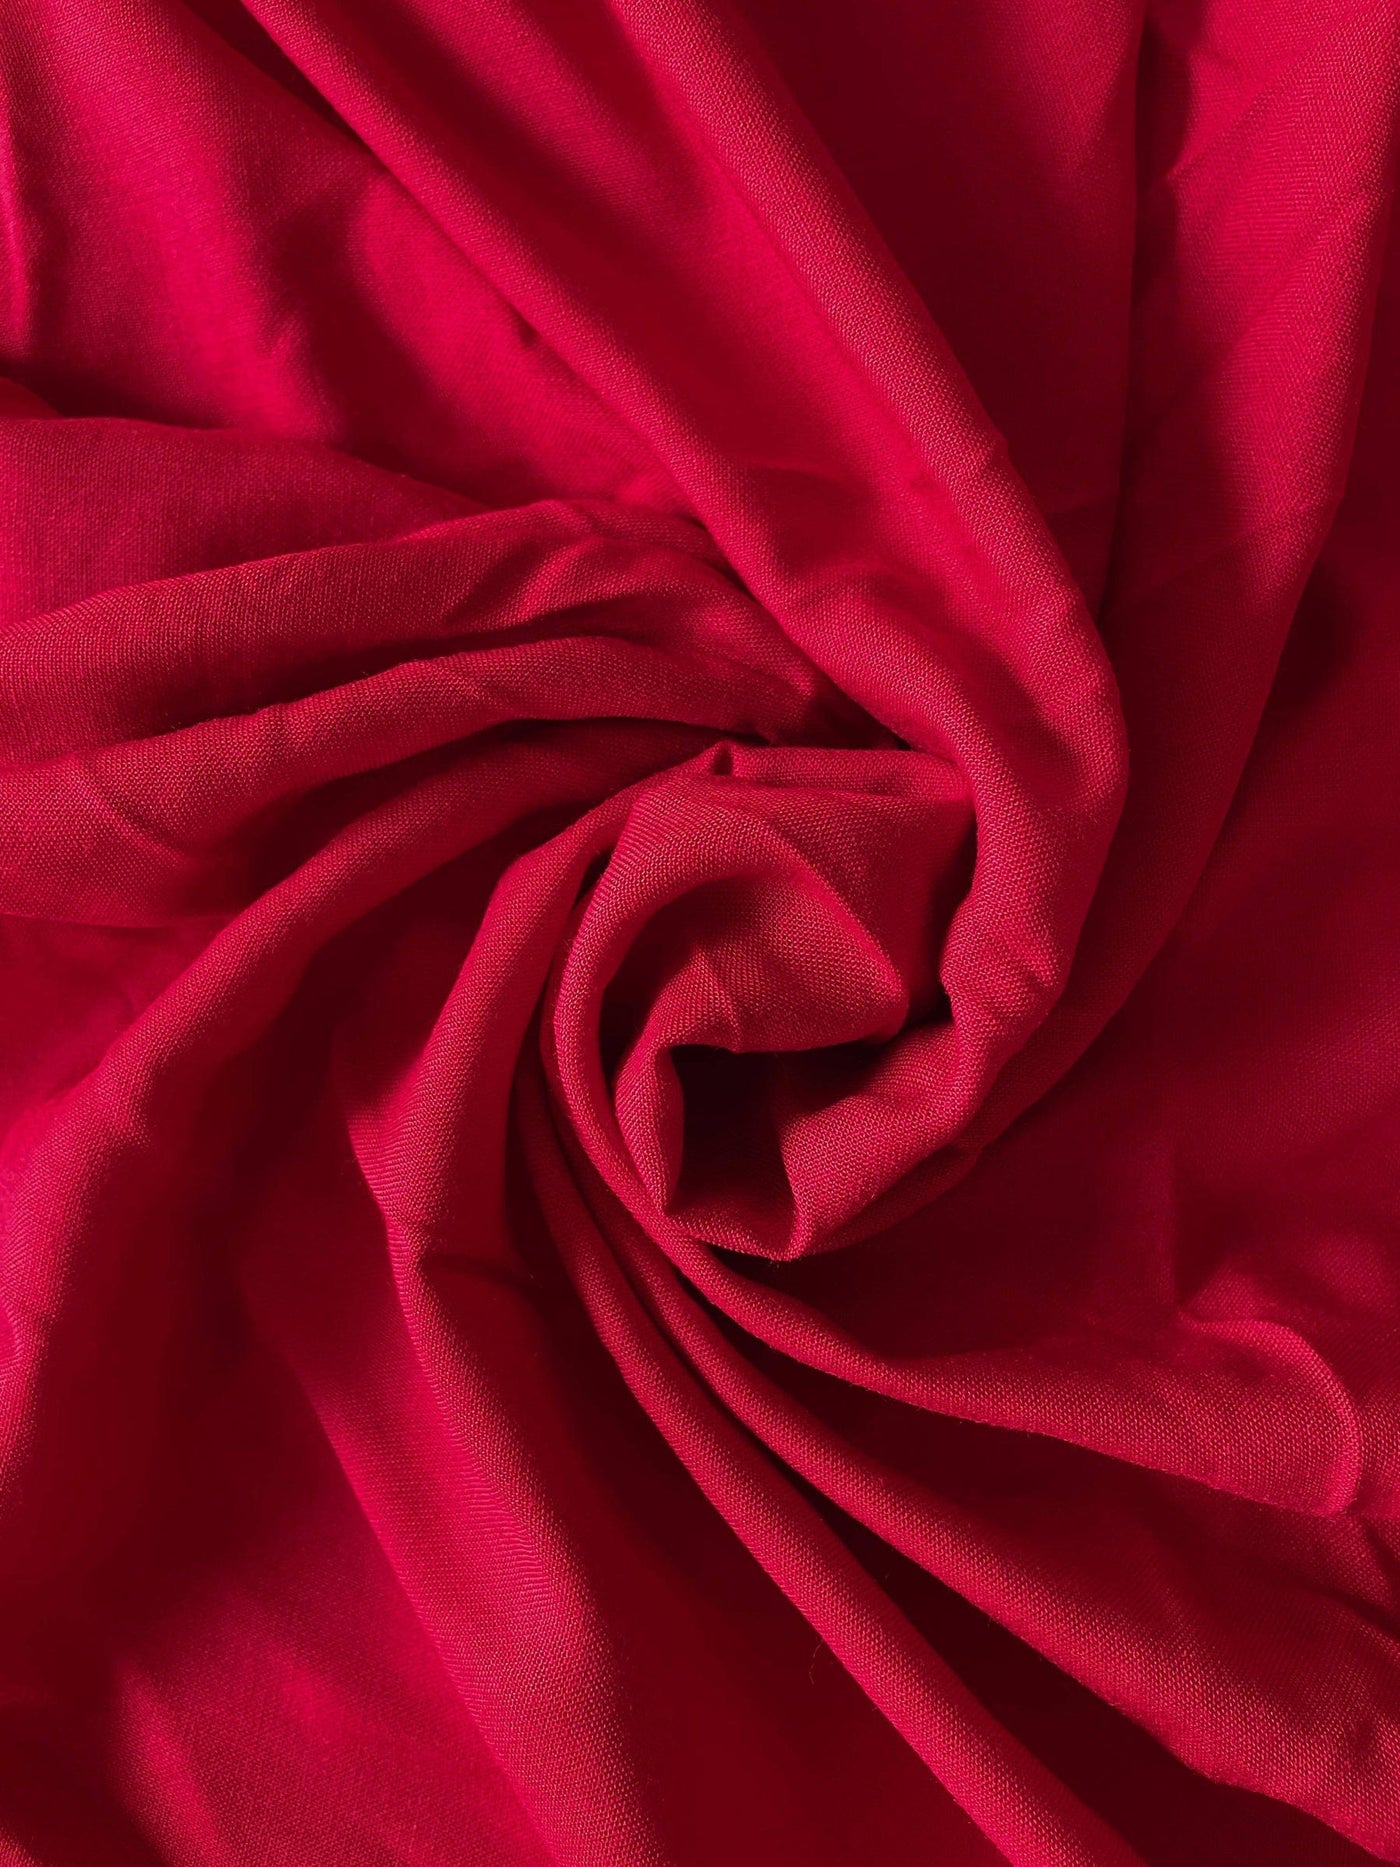 Fabric Pandit Fabric Vermilion Red Color Pure Rayon Fabric